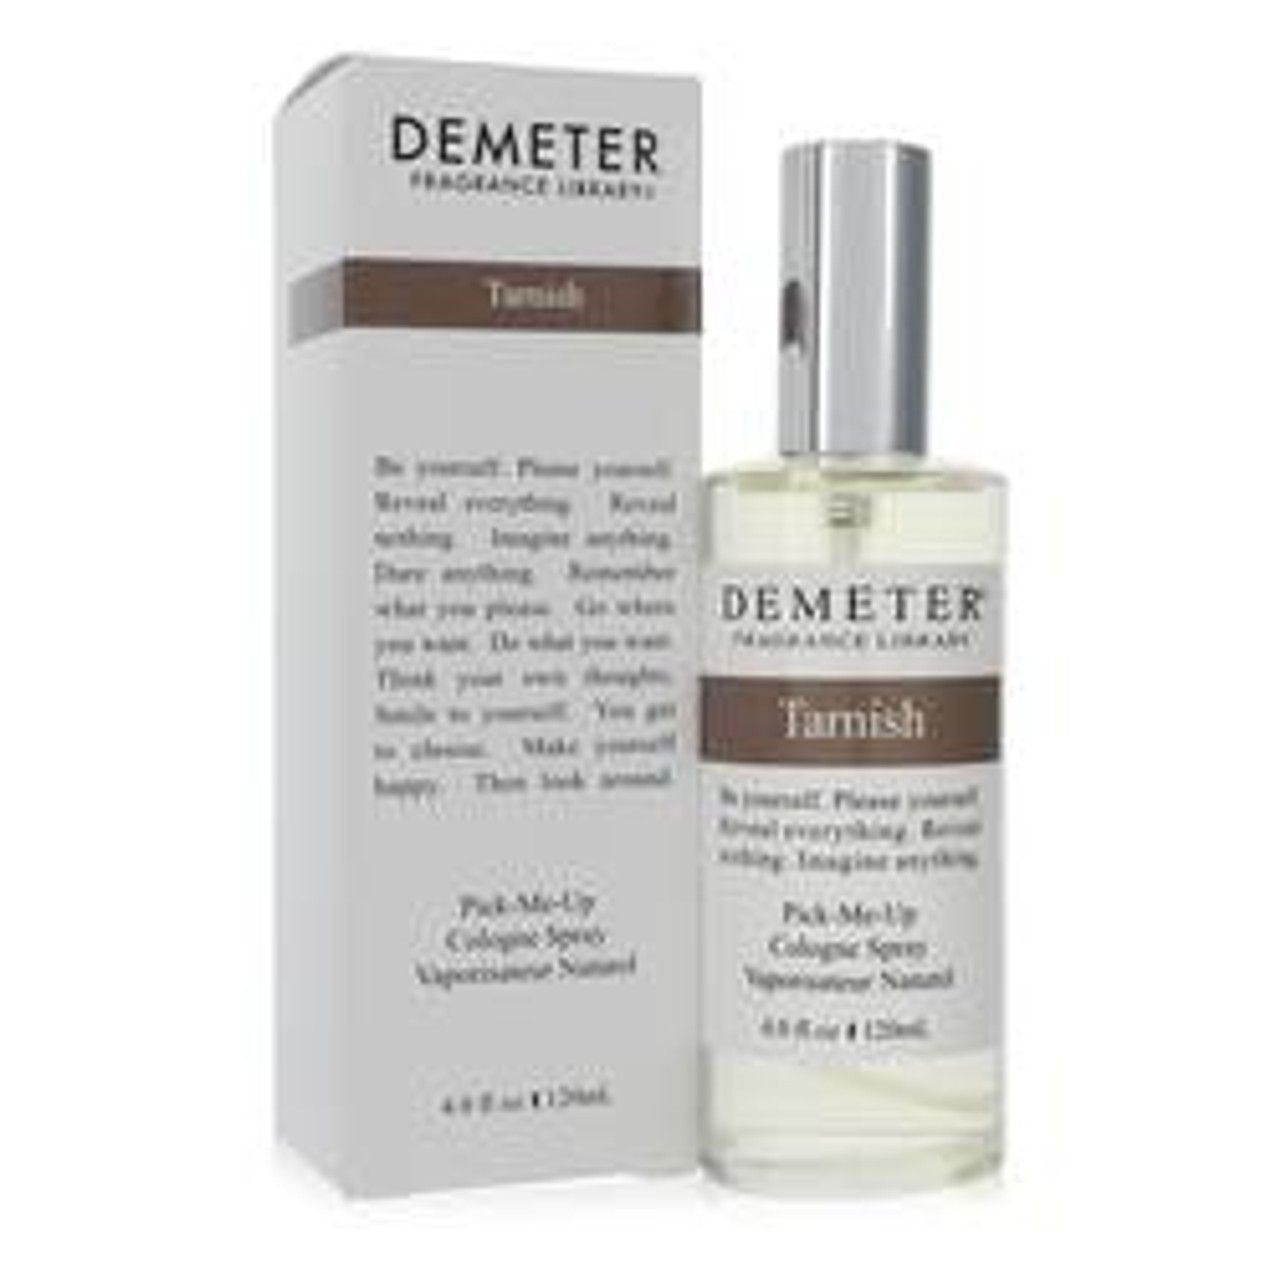 Demeter Tarnish Cologne By Demeter Cologne Spray (Unisex) 4 oz for Men - [From 79.50 - Choose pk Qty ] - *Ships from Miami